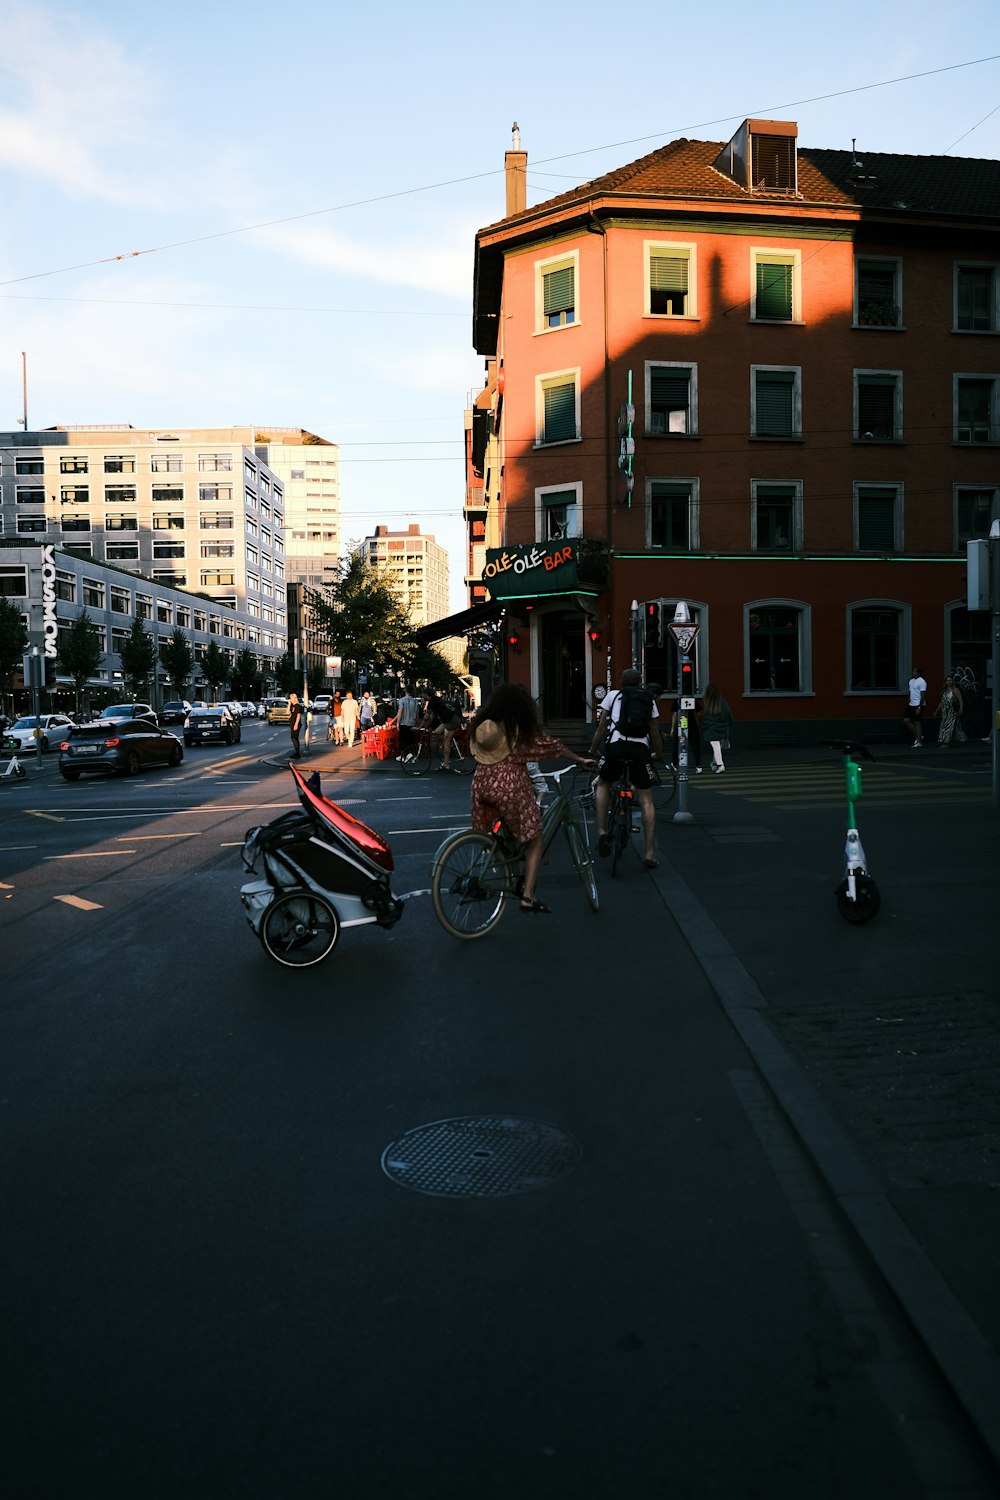 a group of people riding bikes on a street